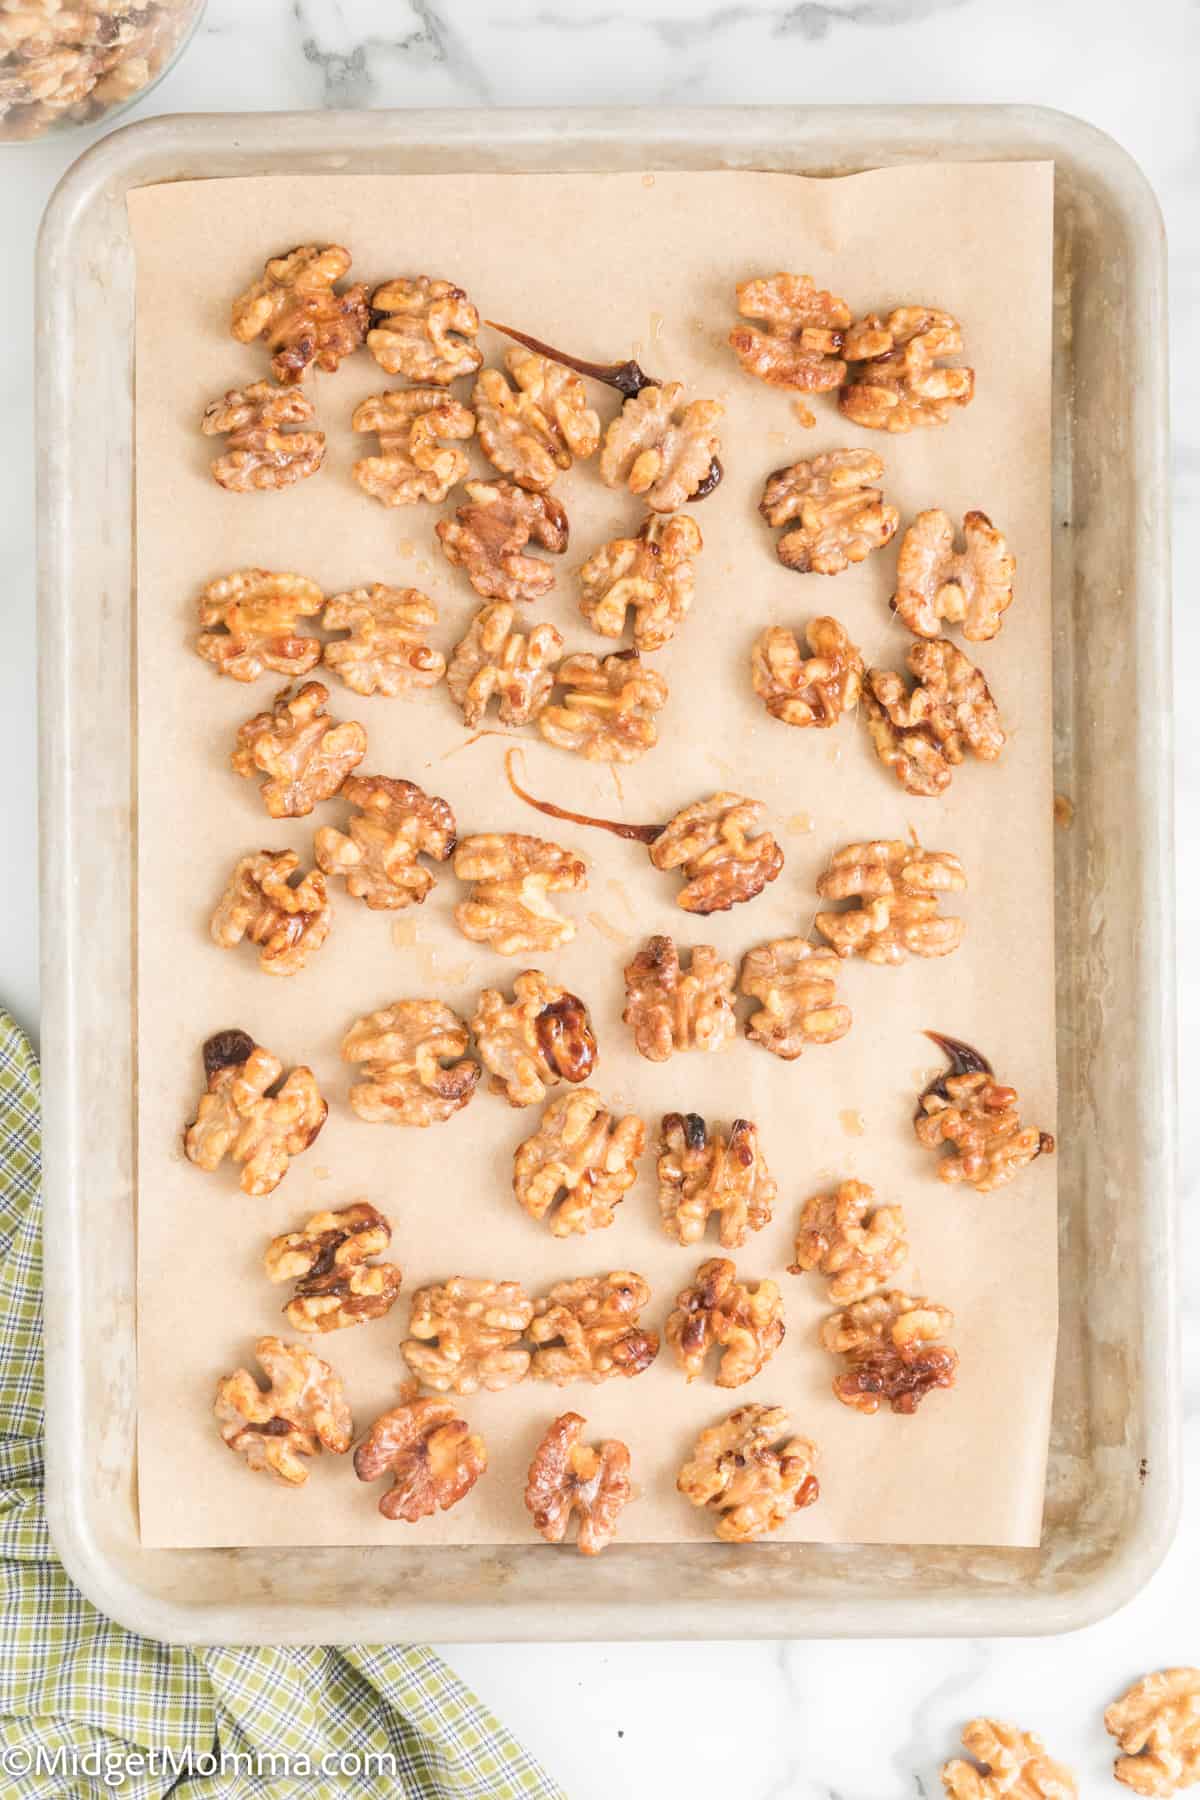 candied walnuts finished cooking cooling on a baking sheet